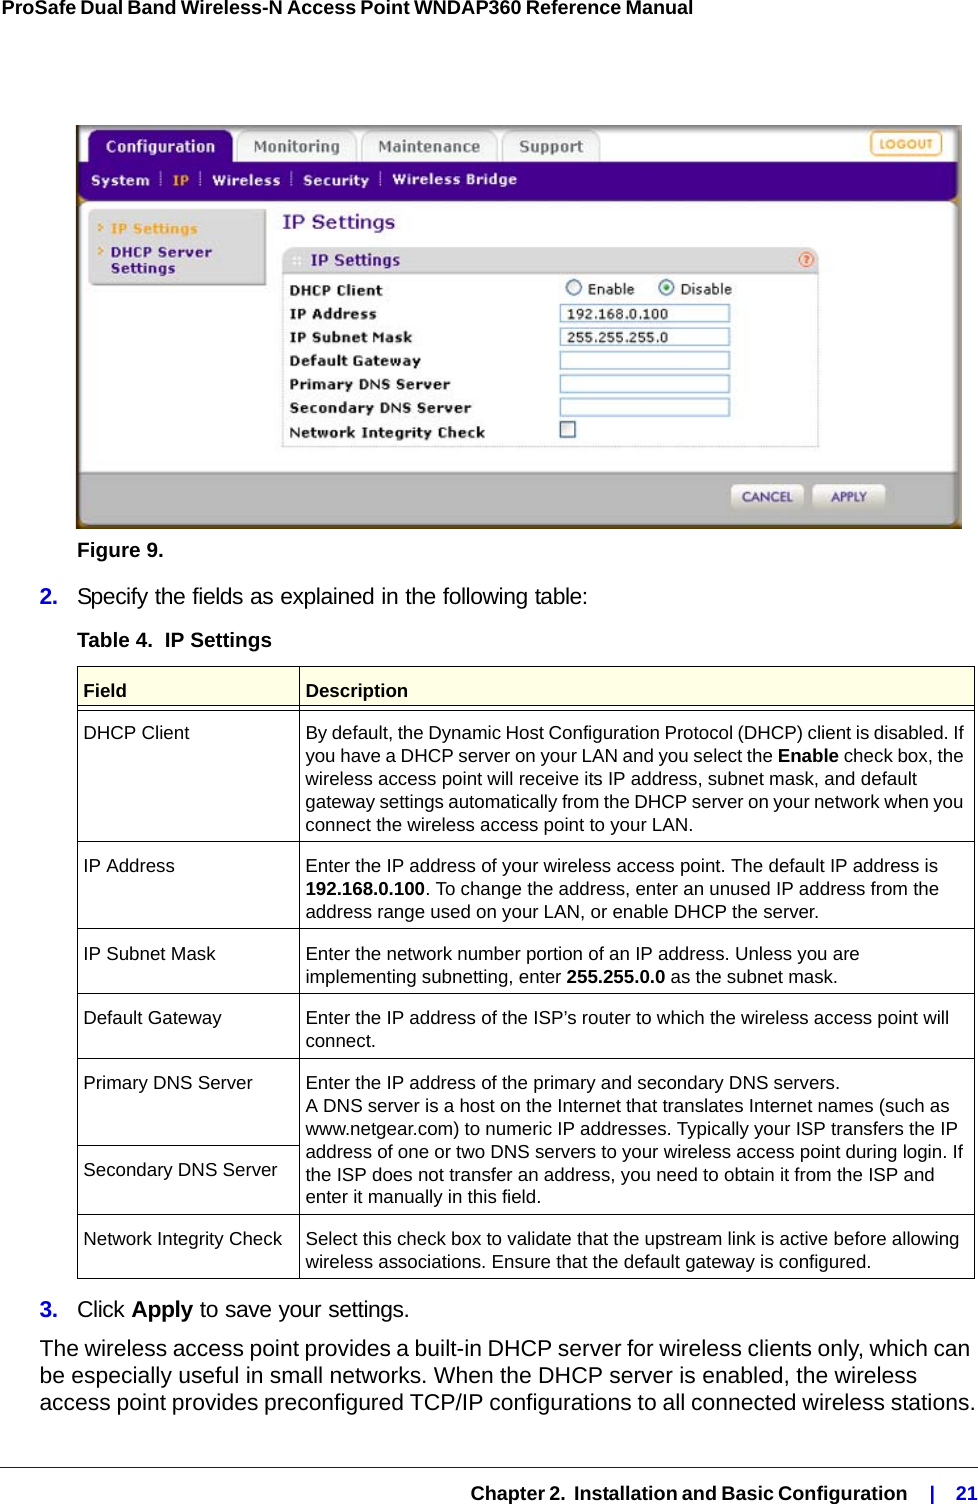   Chapter 2.  Installation and Basic Configuration    |    21ProSafe Dual Band Wireless-N Access Point WNDAP360 Reference Manual Figure 9.  2.  Specify the fields as explained in the following table:3.  Click Apply to save your settings.The wireless access point provides a built-in DHCP server for wireless clients only, which can be especially useful in small networks. When the DHCP server is enabled, the wireless access point provides preconfigured TCP/IP configurations to all connected wireless stations.Table 4.  IP Settings Field  DescriptionDHCP Client By default, the Dynamic Host Configuration Protocol (DHCP) client is disabled. If you have a DHCP server on your LAN and you select the Enable check box, the wireless access point will receive its IP address, subnet mask, and default gateway settings automatically from the DHCP server on your network when you connect the wireless access point to your LAN.IP Address Enter the IP address of your wireless access point. The default IP address is 192.168.0.100. To change the address, enter an unused IP address from the address range used on your LAN, or enable DHCP the server.IP Subnet Mask Enter the network number portion of an IP address. Unless you are implementing subnetting, enter 255.255.0.0 as the subnet mask.Default Gateway Enter the IP address of the ISP’s router to which the wireless access point will connect.Primary DNS Server  Enter the IP address of the primary and secondary DNS servers.  A DNS server is a host on the Internet that translates Internet names (such as www.netgear.com) to numeric IP addresses. Typically your ISP transfers the IP address of one or two DNS servers to your wireless access point during login. If the ISP does not transfer an address, you need to obtain it from the ISP and enter it manually in this field. Secondary DNS ServerNetwork Integrity Check Select this check box to validate that the upstream link is active before allowing wireless associations. Ensure that the default gateway is configured.